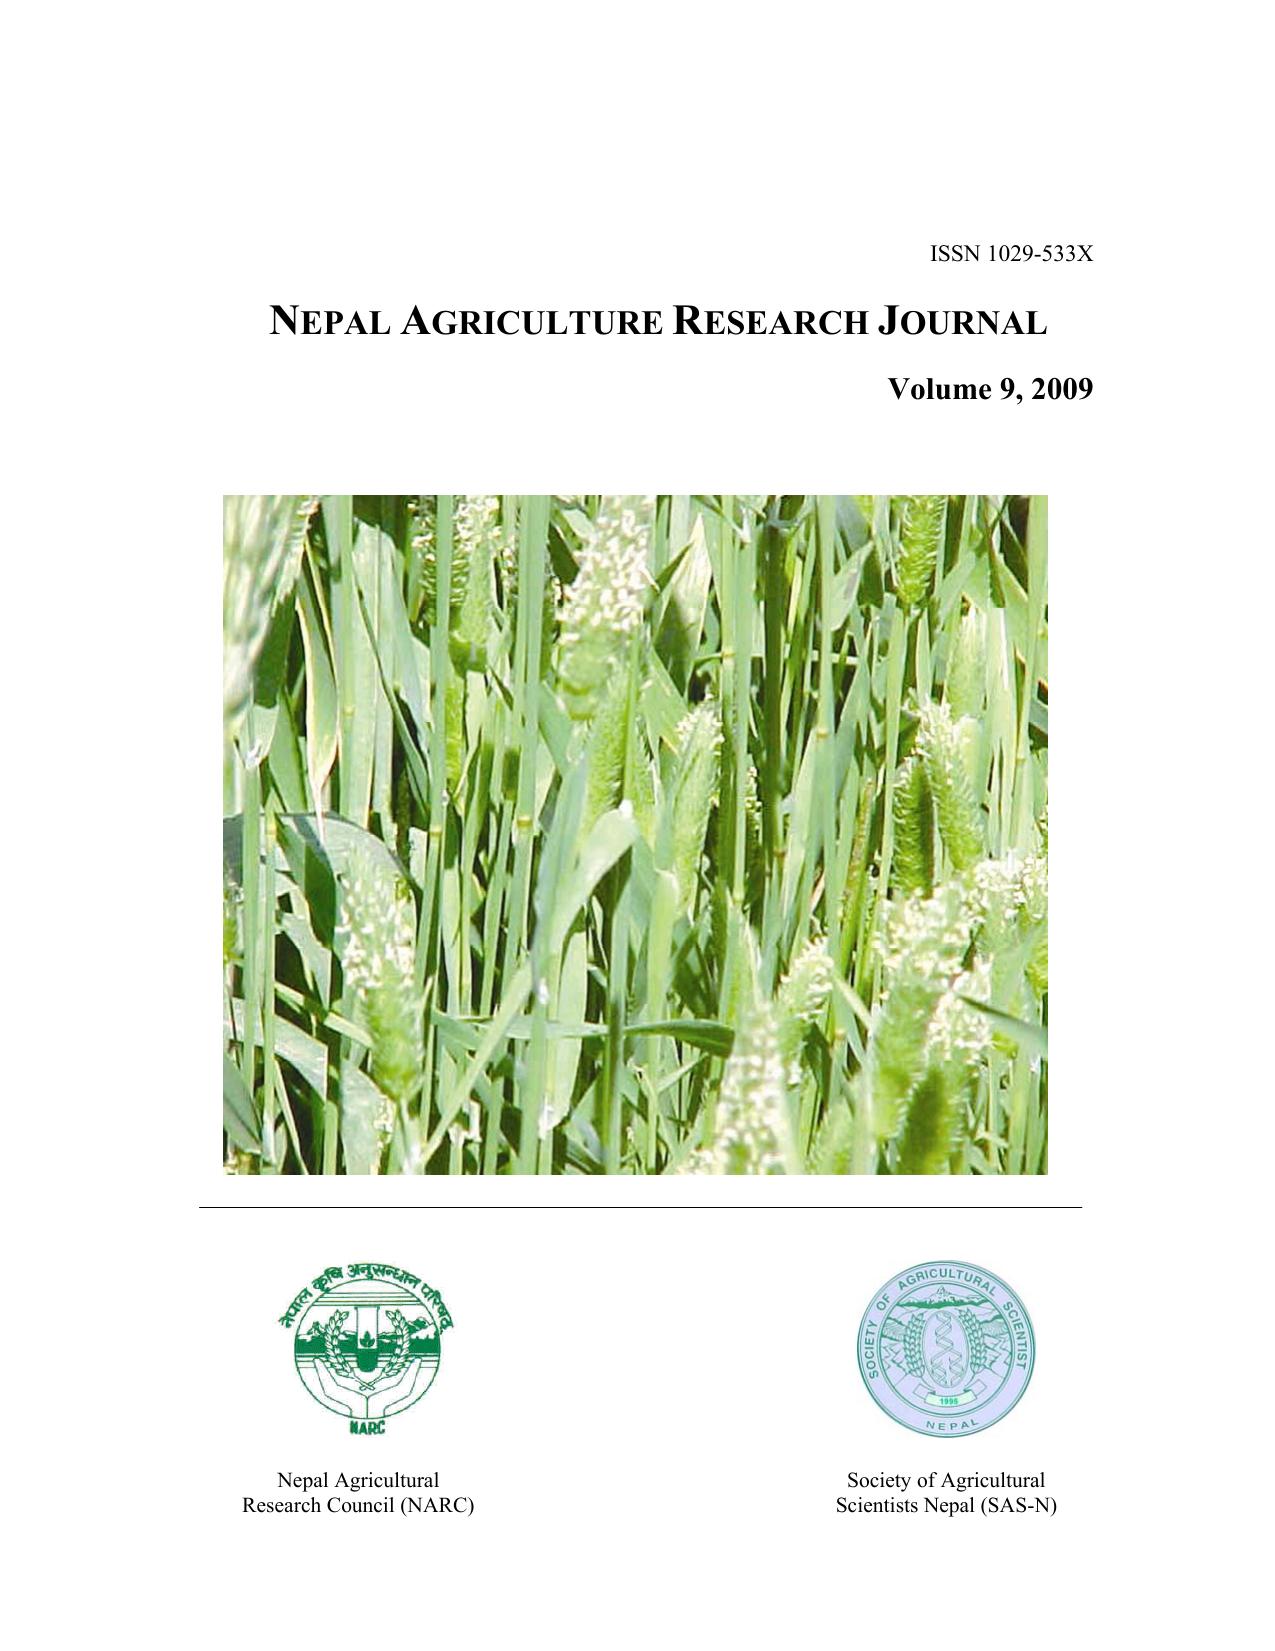 Nepal Agriculture Research Journal Vol9